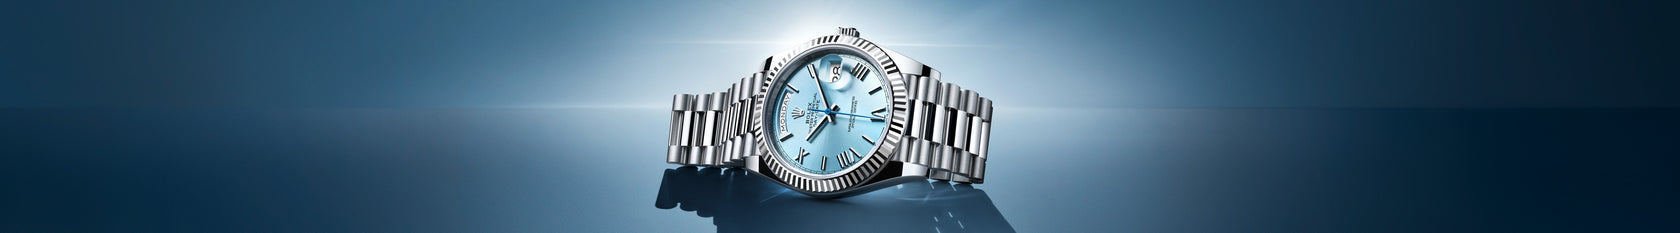 The platinum Rolex Day-Date 40 lying on its side. This 40mm watch is new for 2022 and features a new platinum fluted bezel and ice blue dial, unique to Rolex's platinum watches. Model #228236.